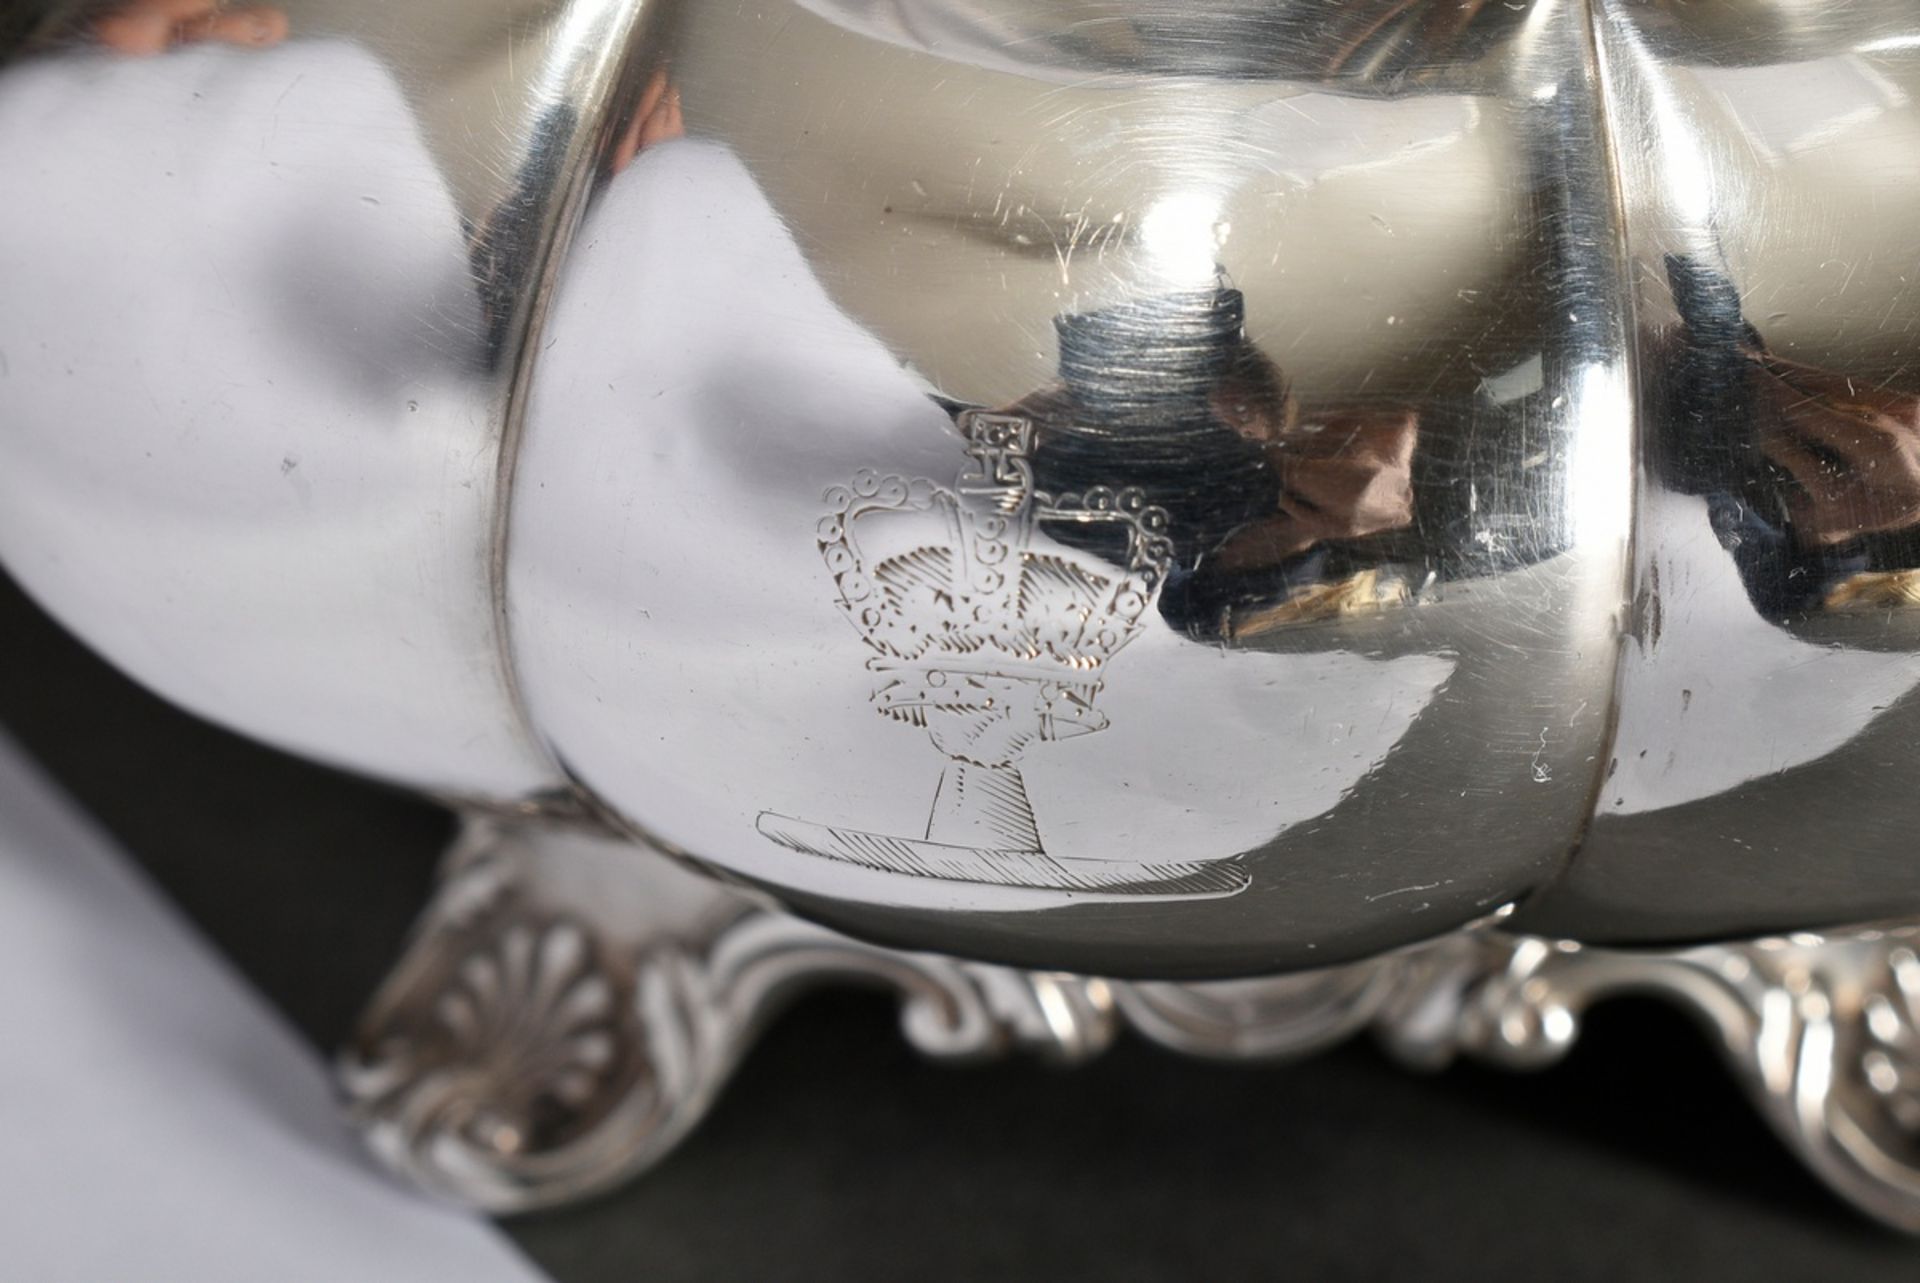 Cambered milk pourer with floral relief rim and feet, engraved family crest "Hand with closed crown - Image 3 of 7